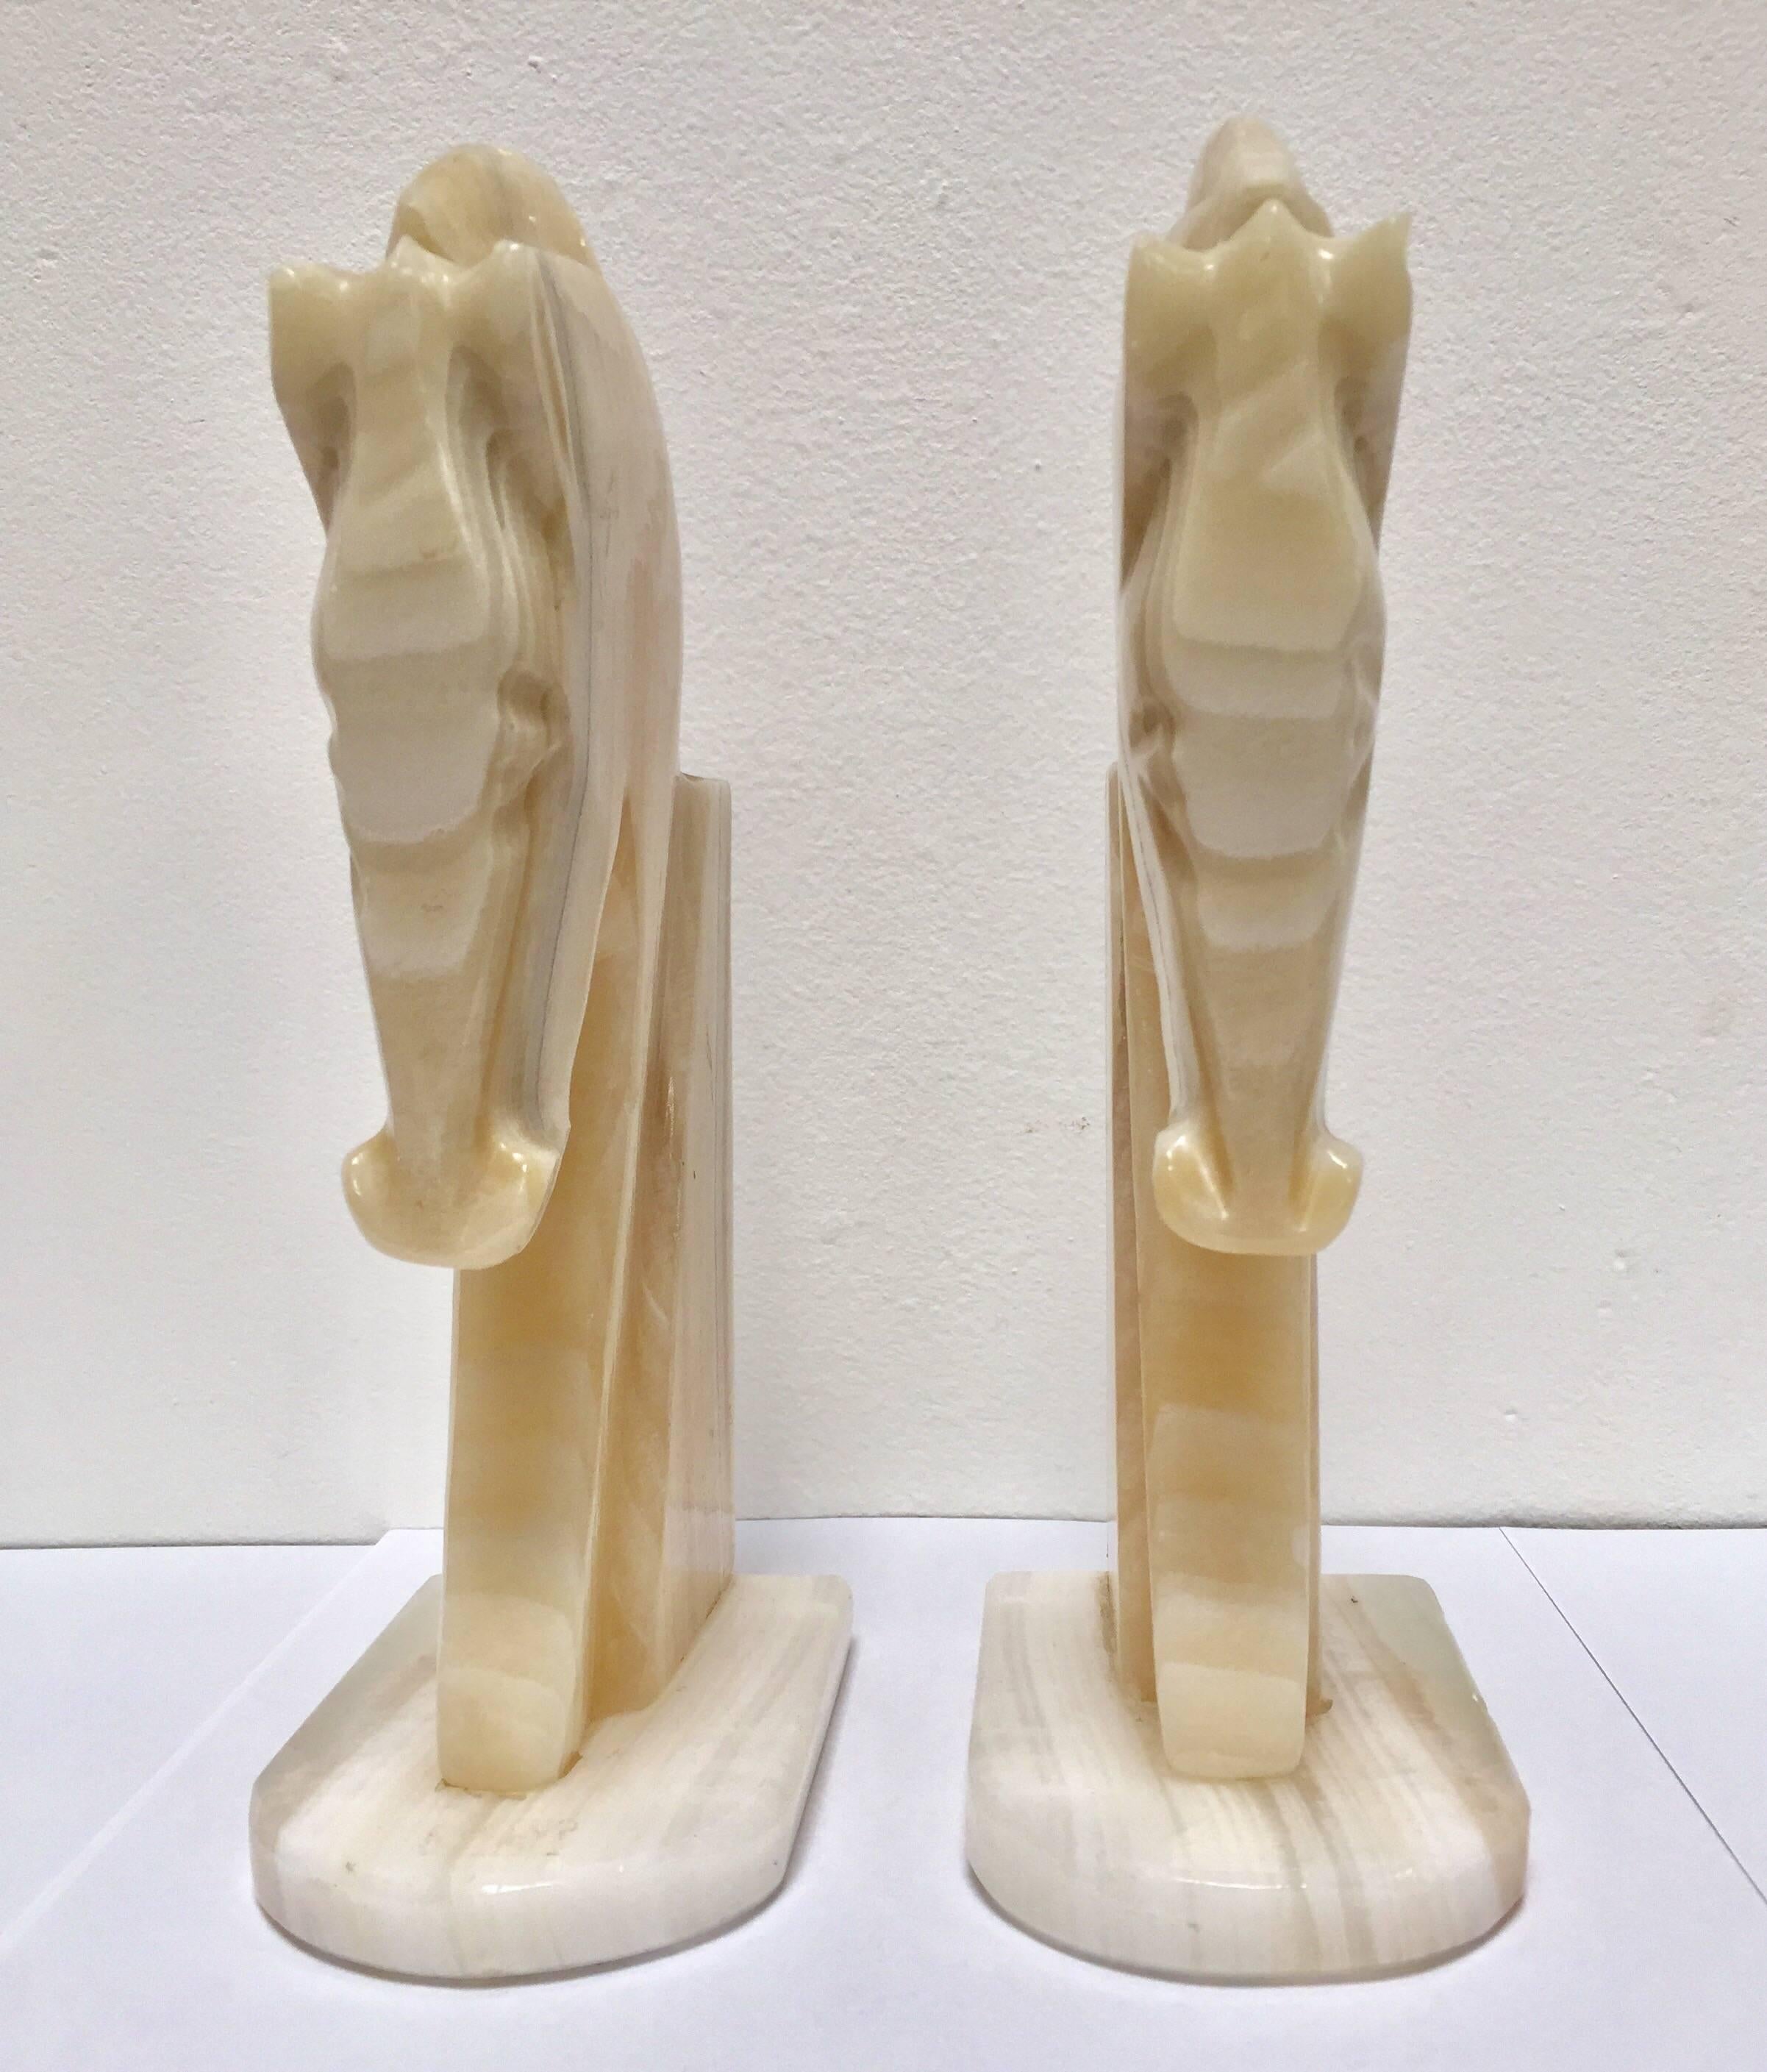 Pair of Art Deco style stylized horses head bookends.
Vintage set of bookends, hand-carved in onyx in a shade of ivory and browns.
Hermes style horses, great modern design.
Measures: Each horse head measure 8.5